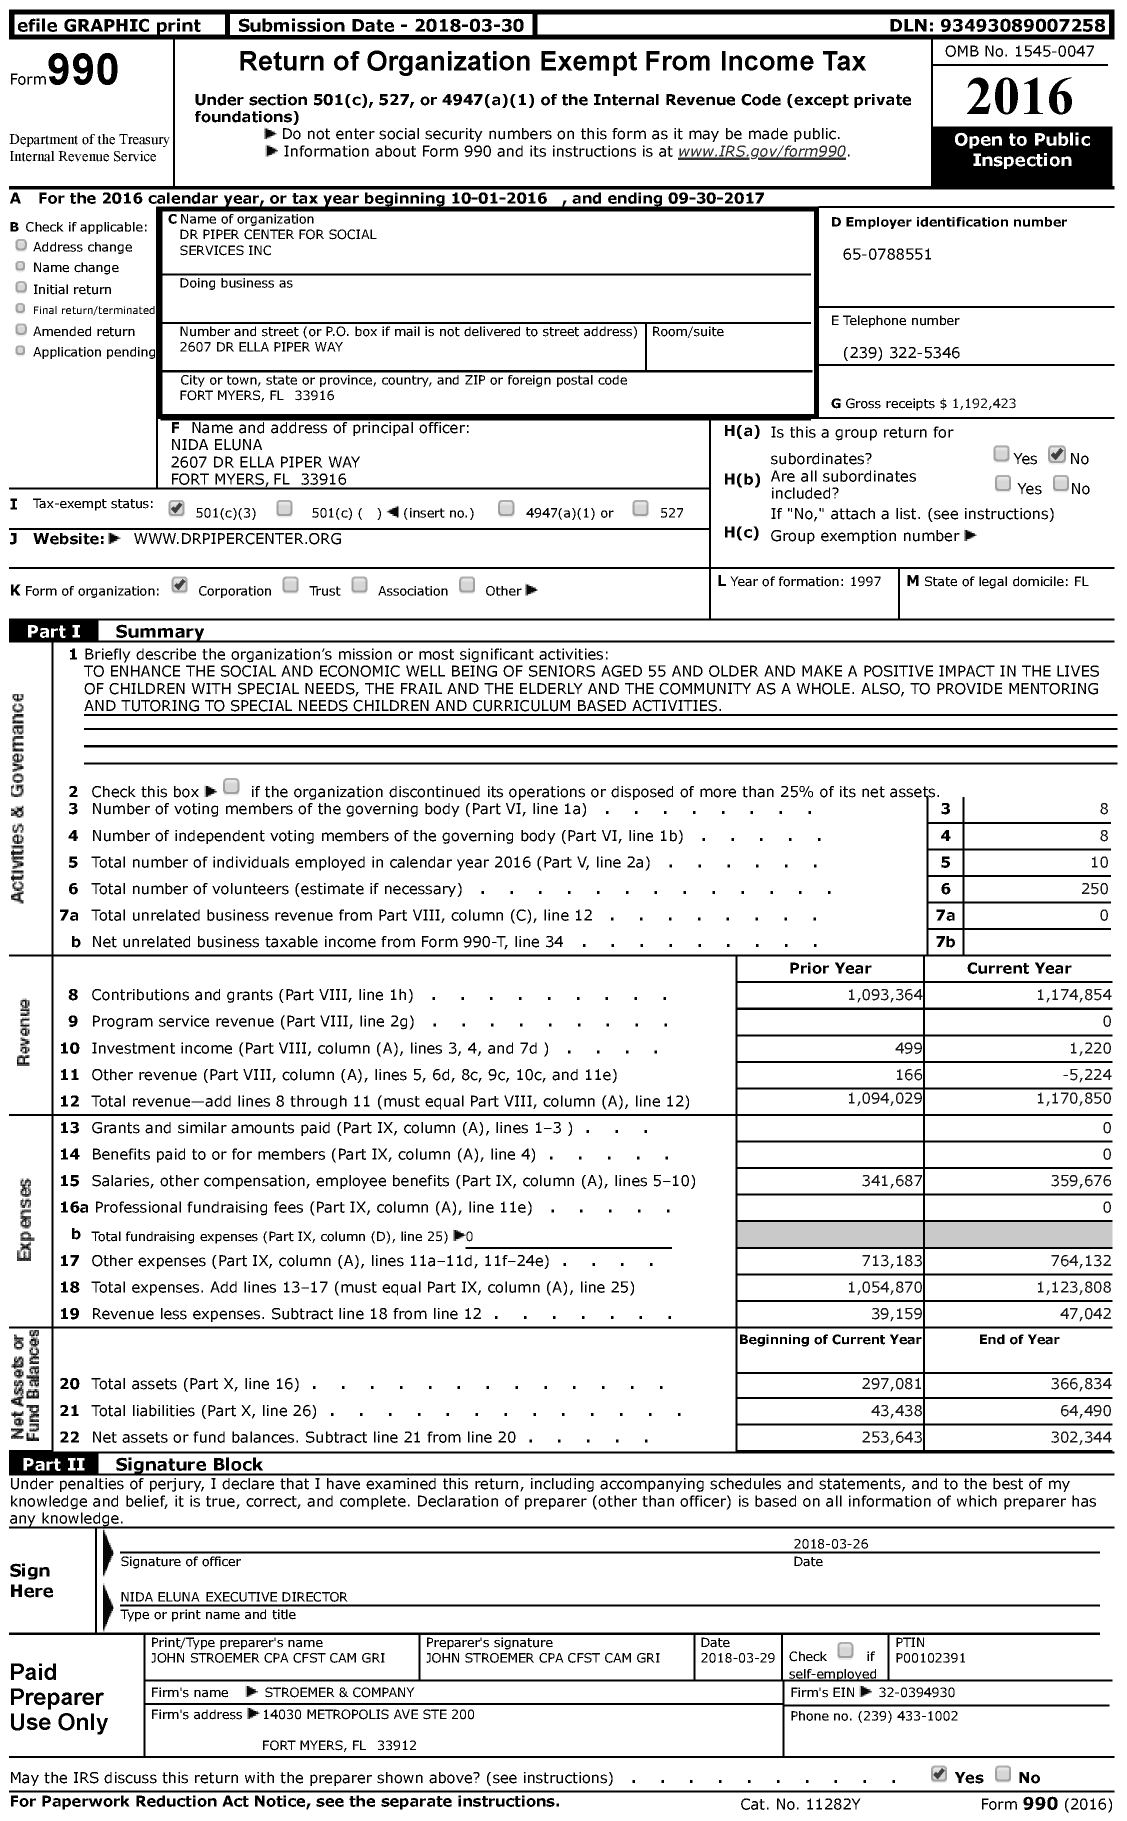 Image of first page of 2016 Form 990 for Dr Piper Center for Social Services